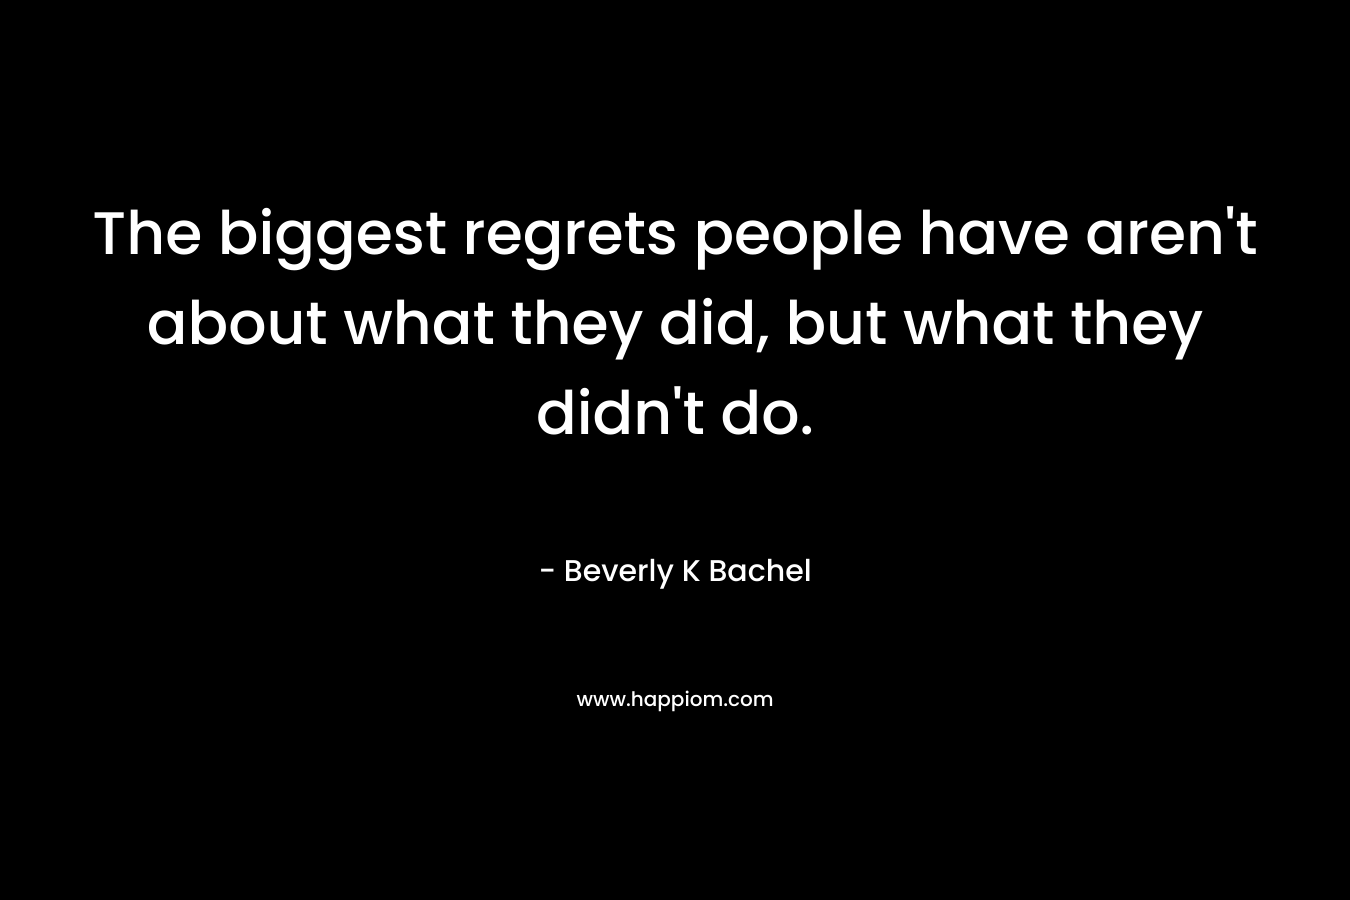 The biggest regrets people have aren't about what they did, but what they didn't do.